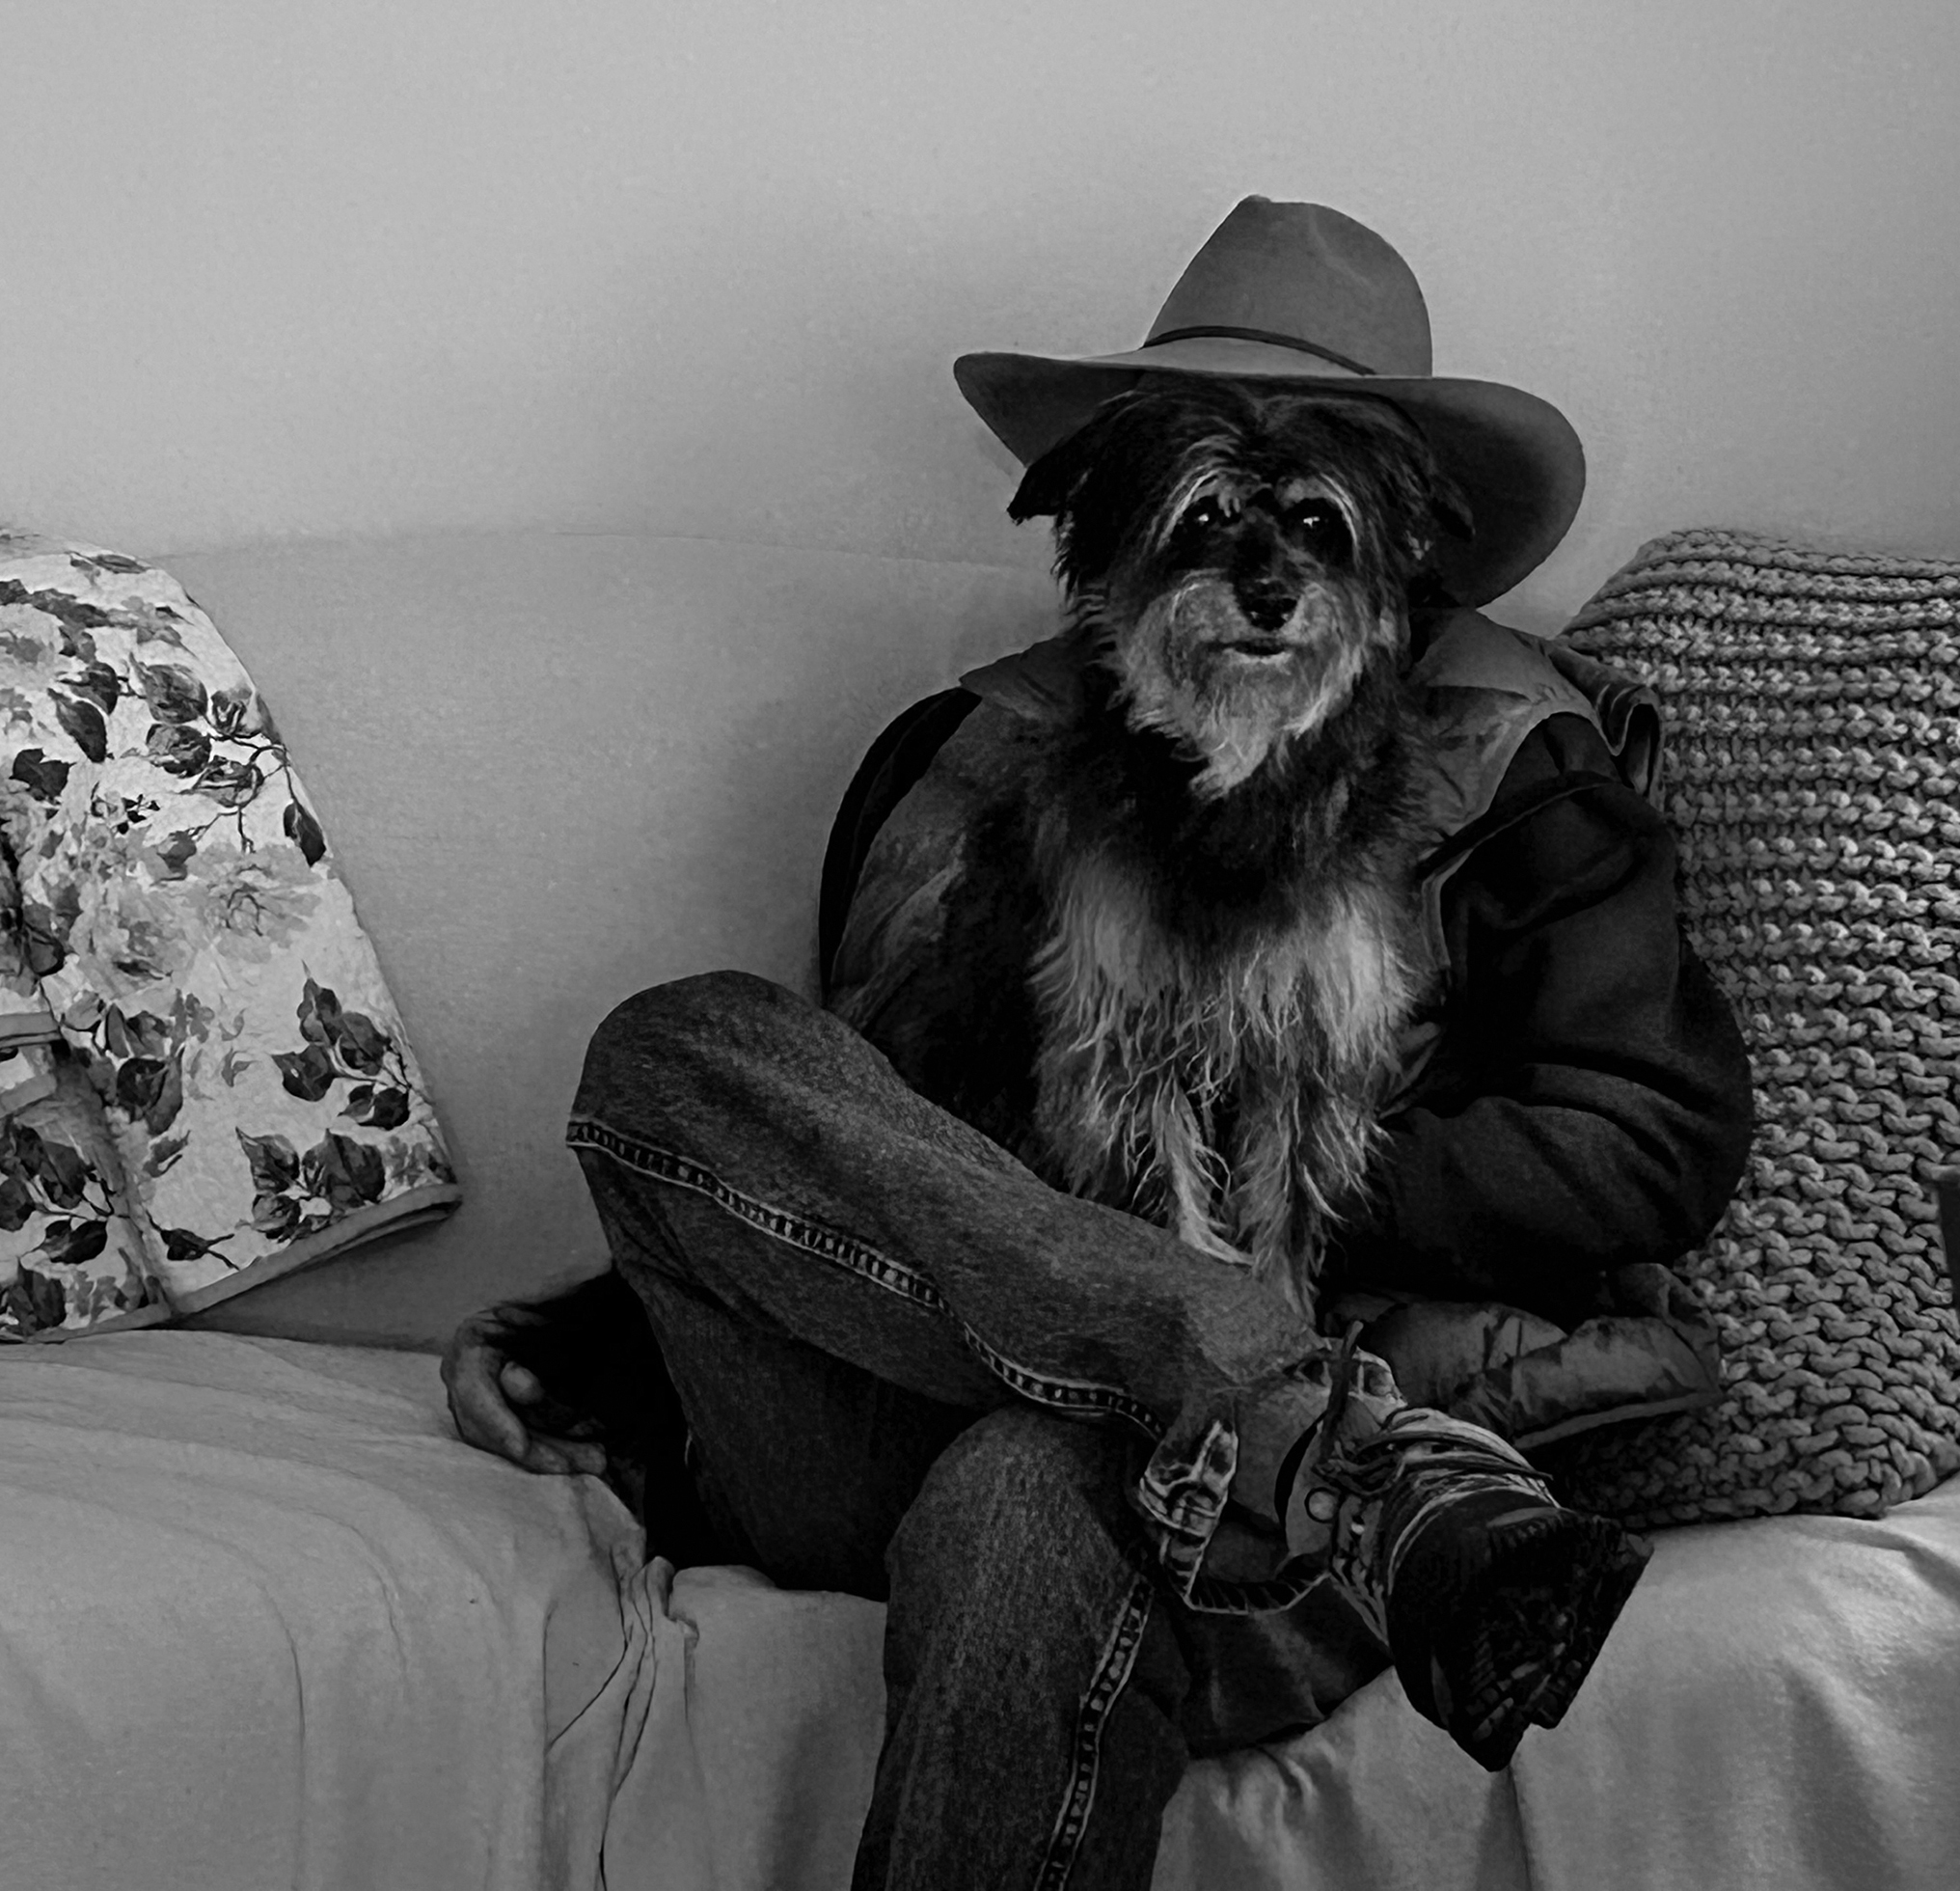 A man wearing a cowboy hat, jacket, and jeans sits on a couch with a dog on his lap. The dog is perfectly positioned so that its face appears to be the man’s under the hat.